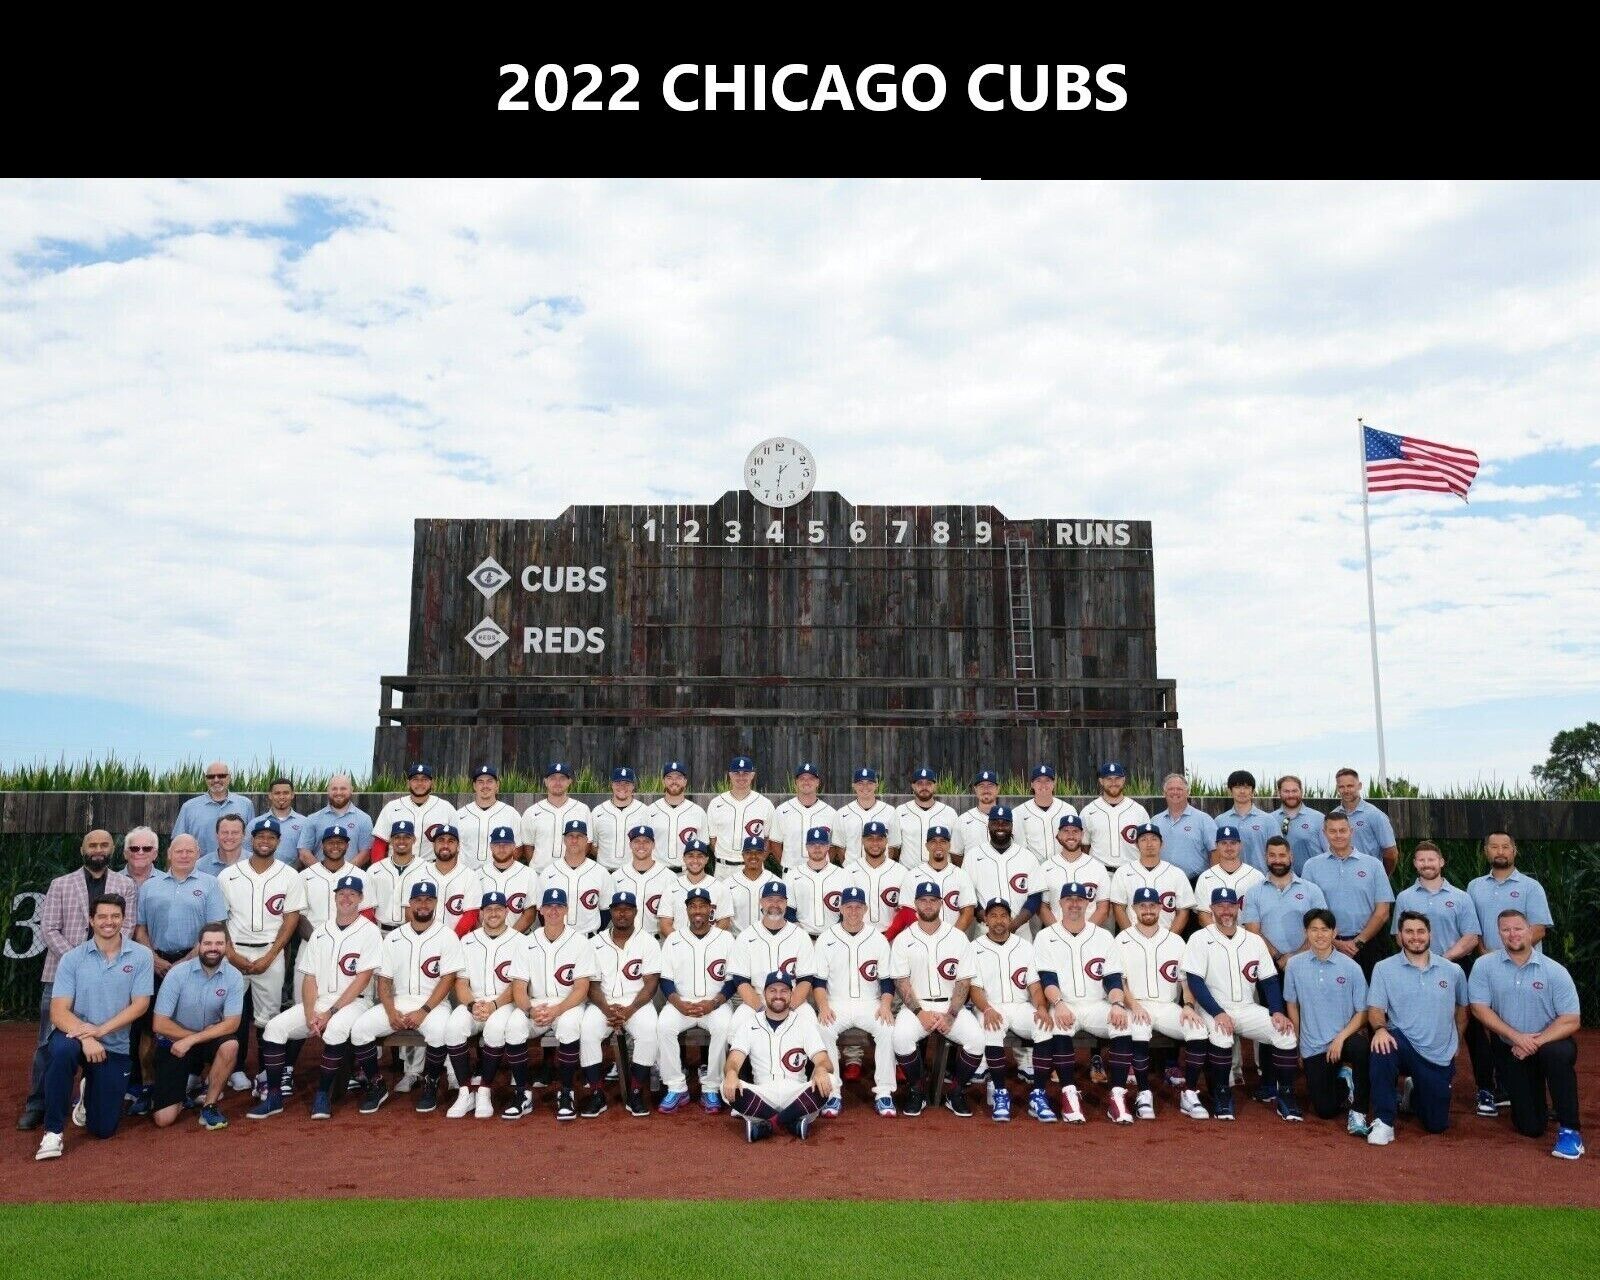 Primary image for 2022 CHICAGO CUBS 8X10 TEAM PHOTO BASEBALL PICTURE MLB